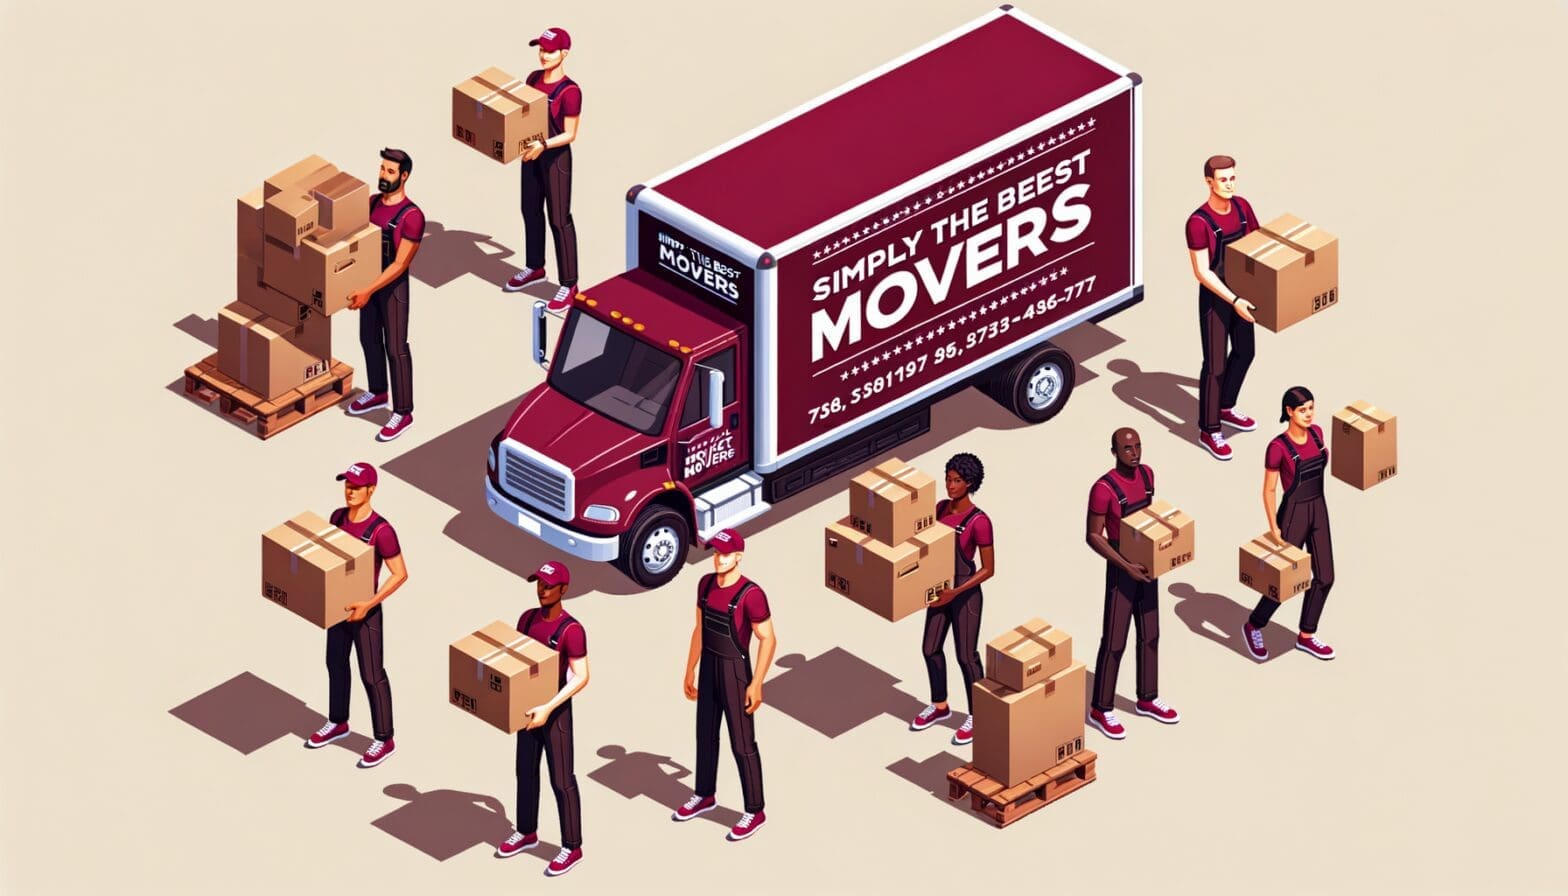 Simply The Best Movers Simple Moves and Storage